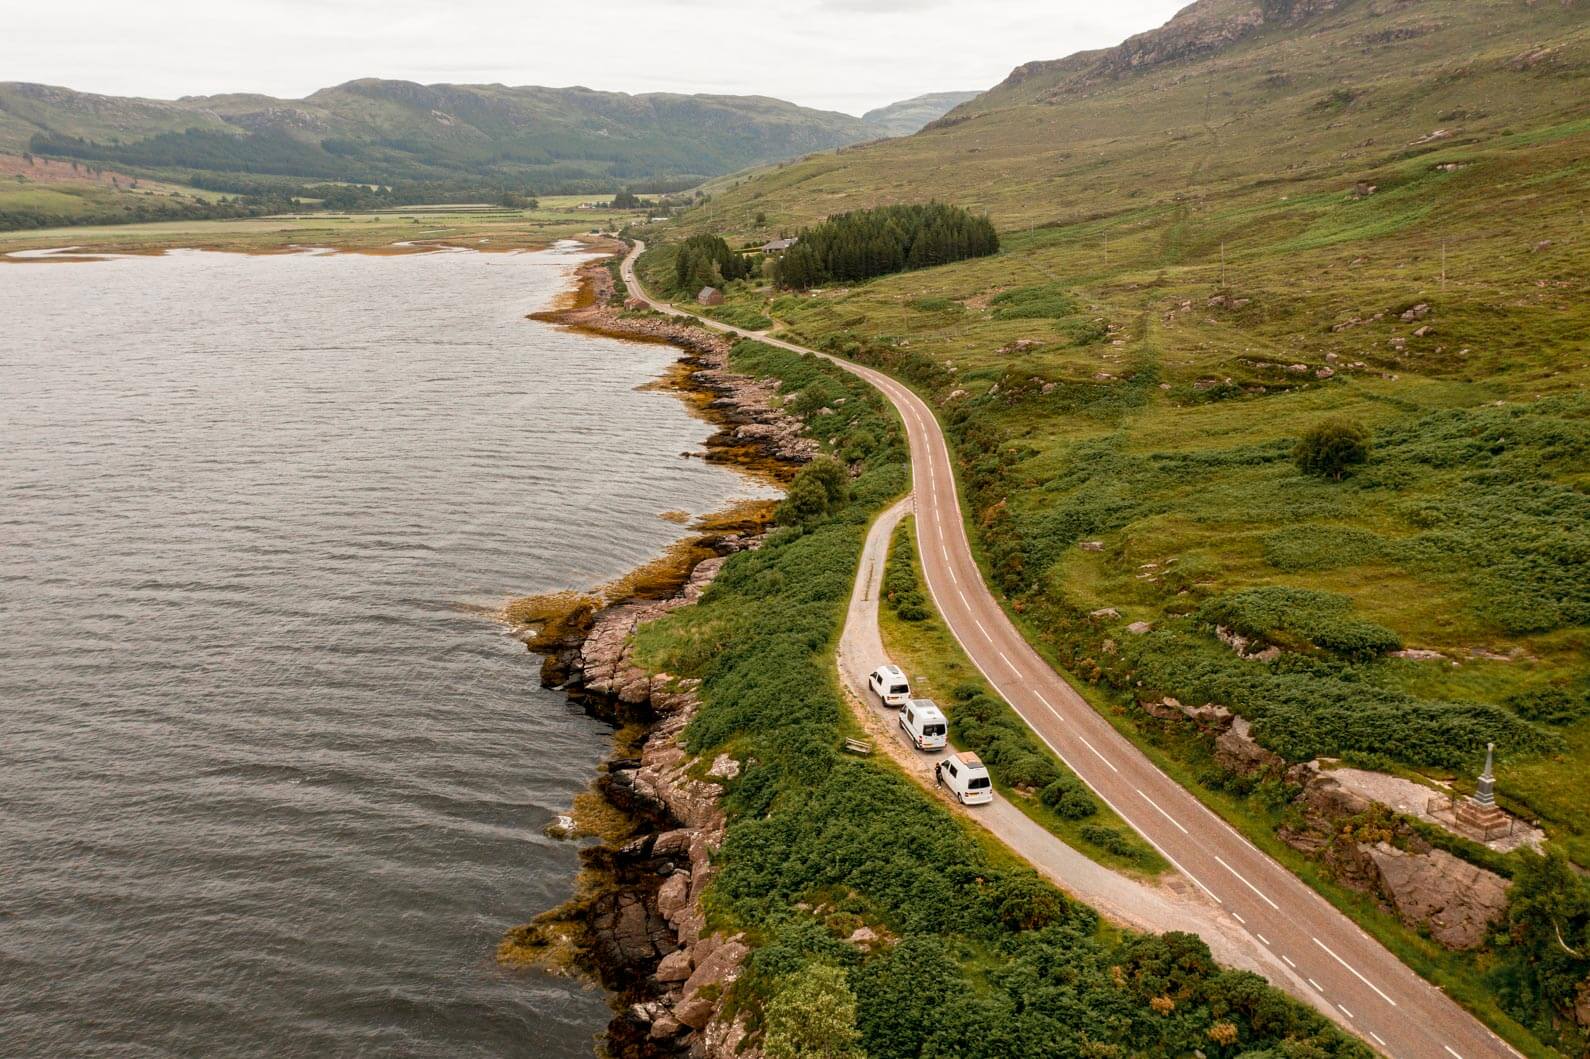 Top tips for your road trip in Scotland